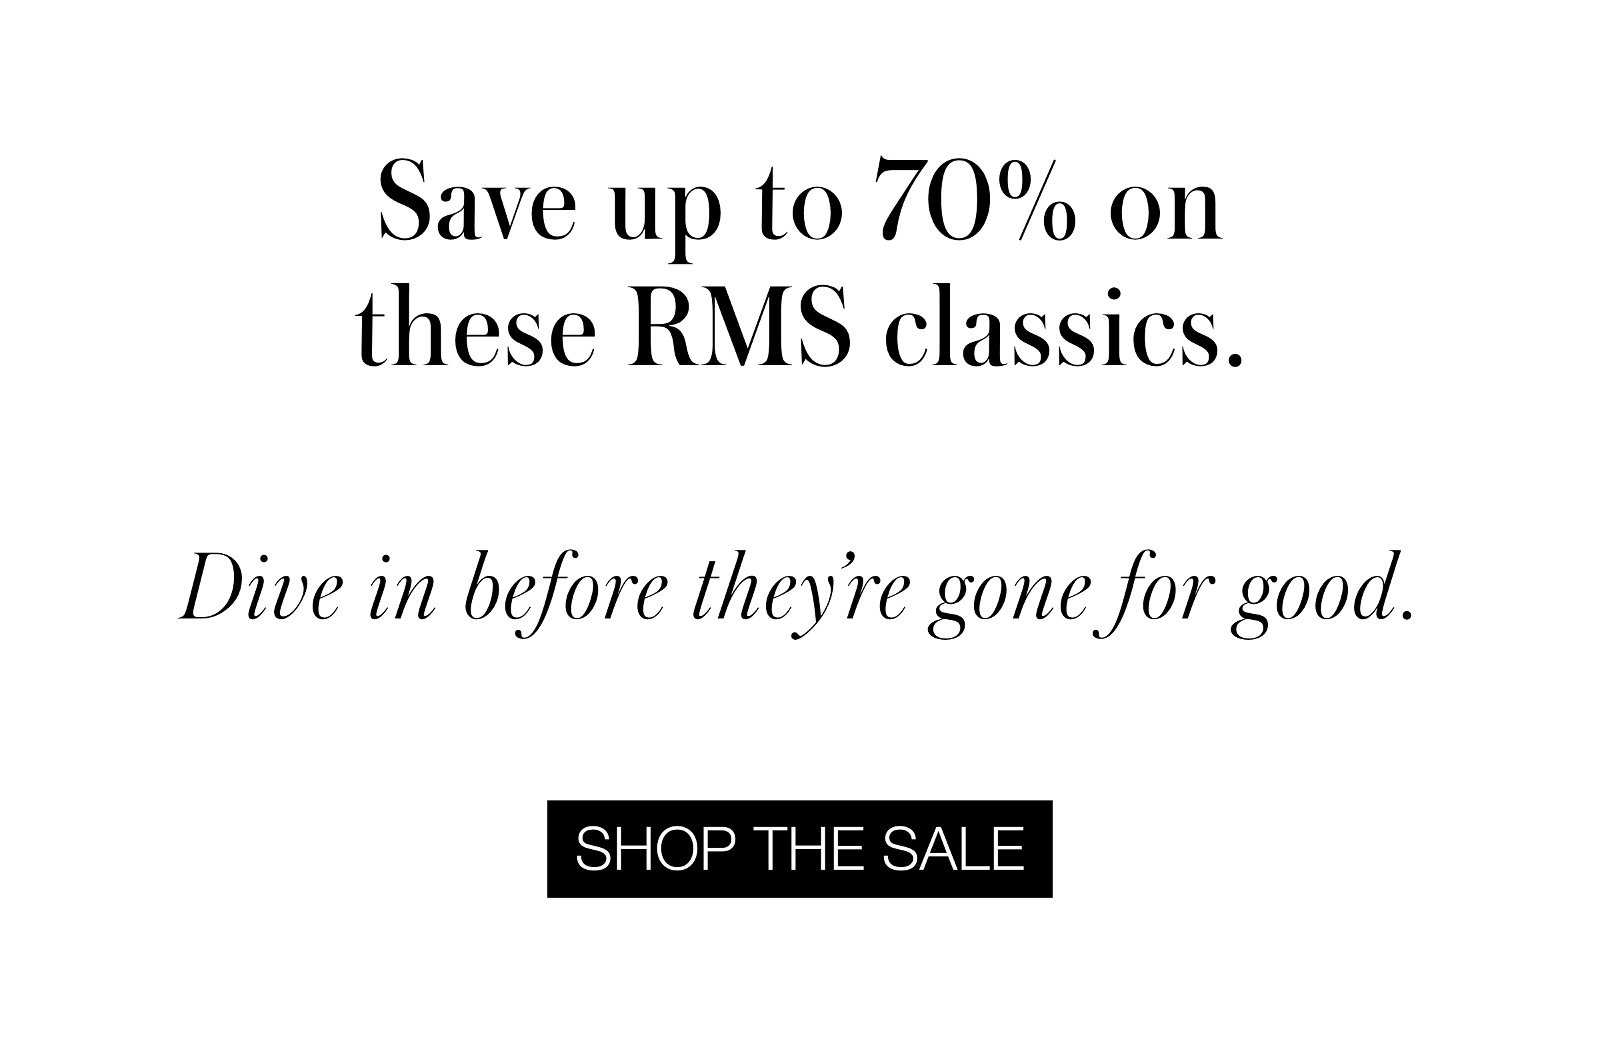 Save up to 70% on these RMS classics. Dive in before they're gone for good. Shop the sale.